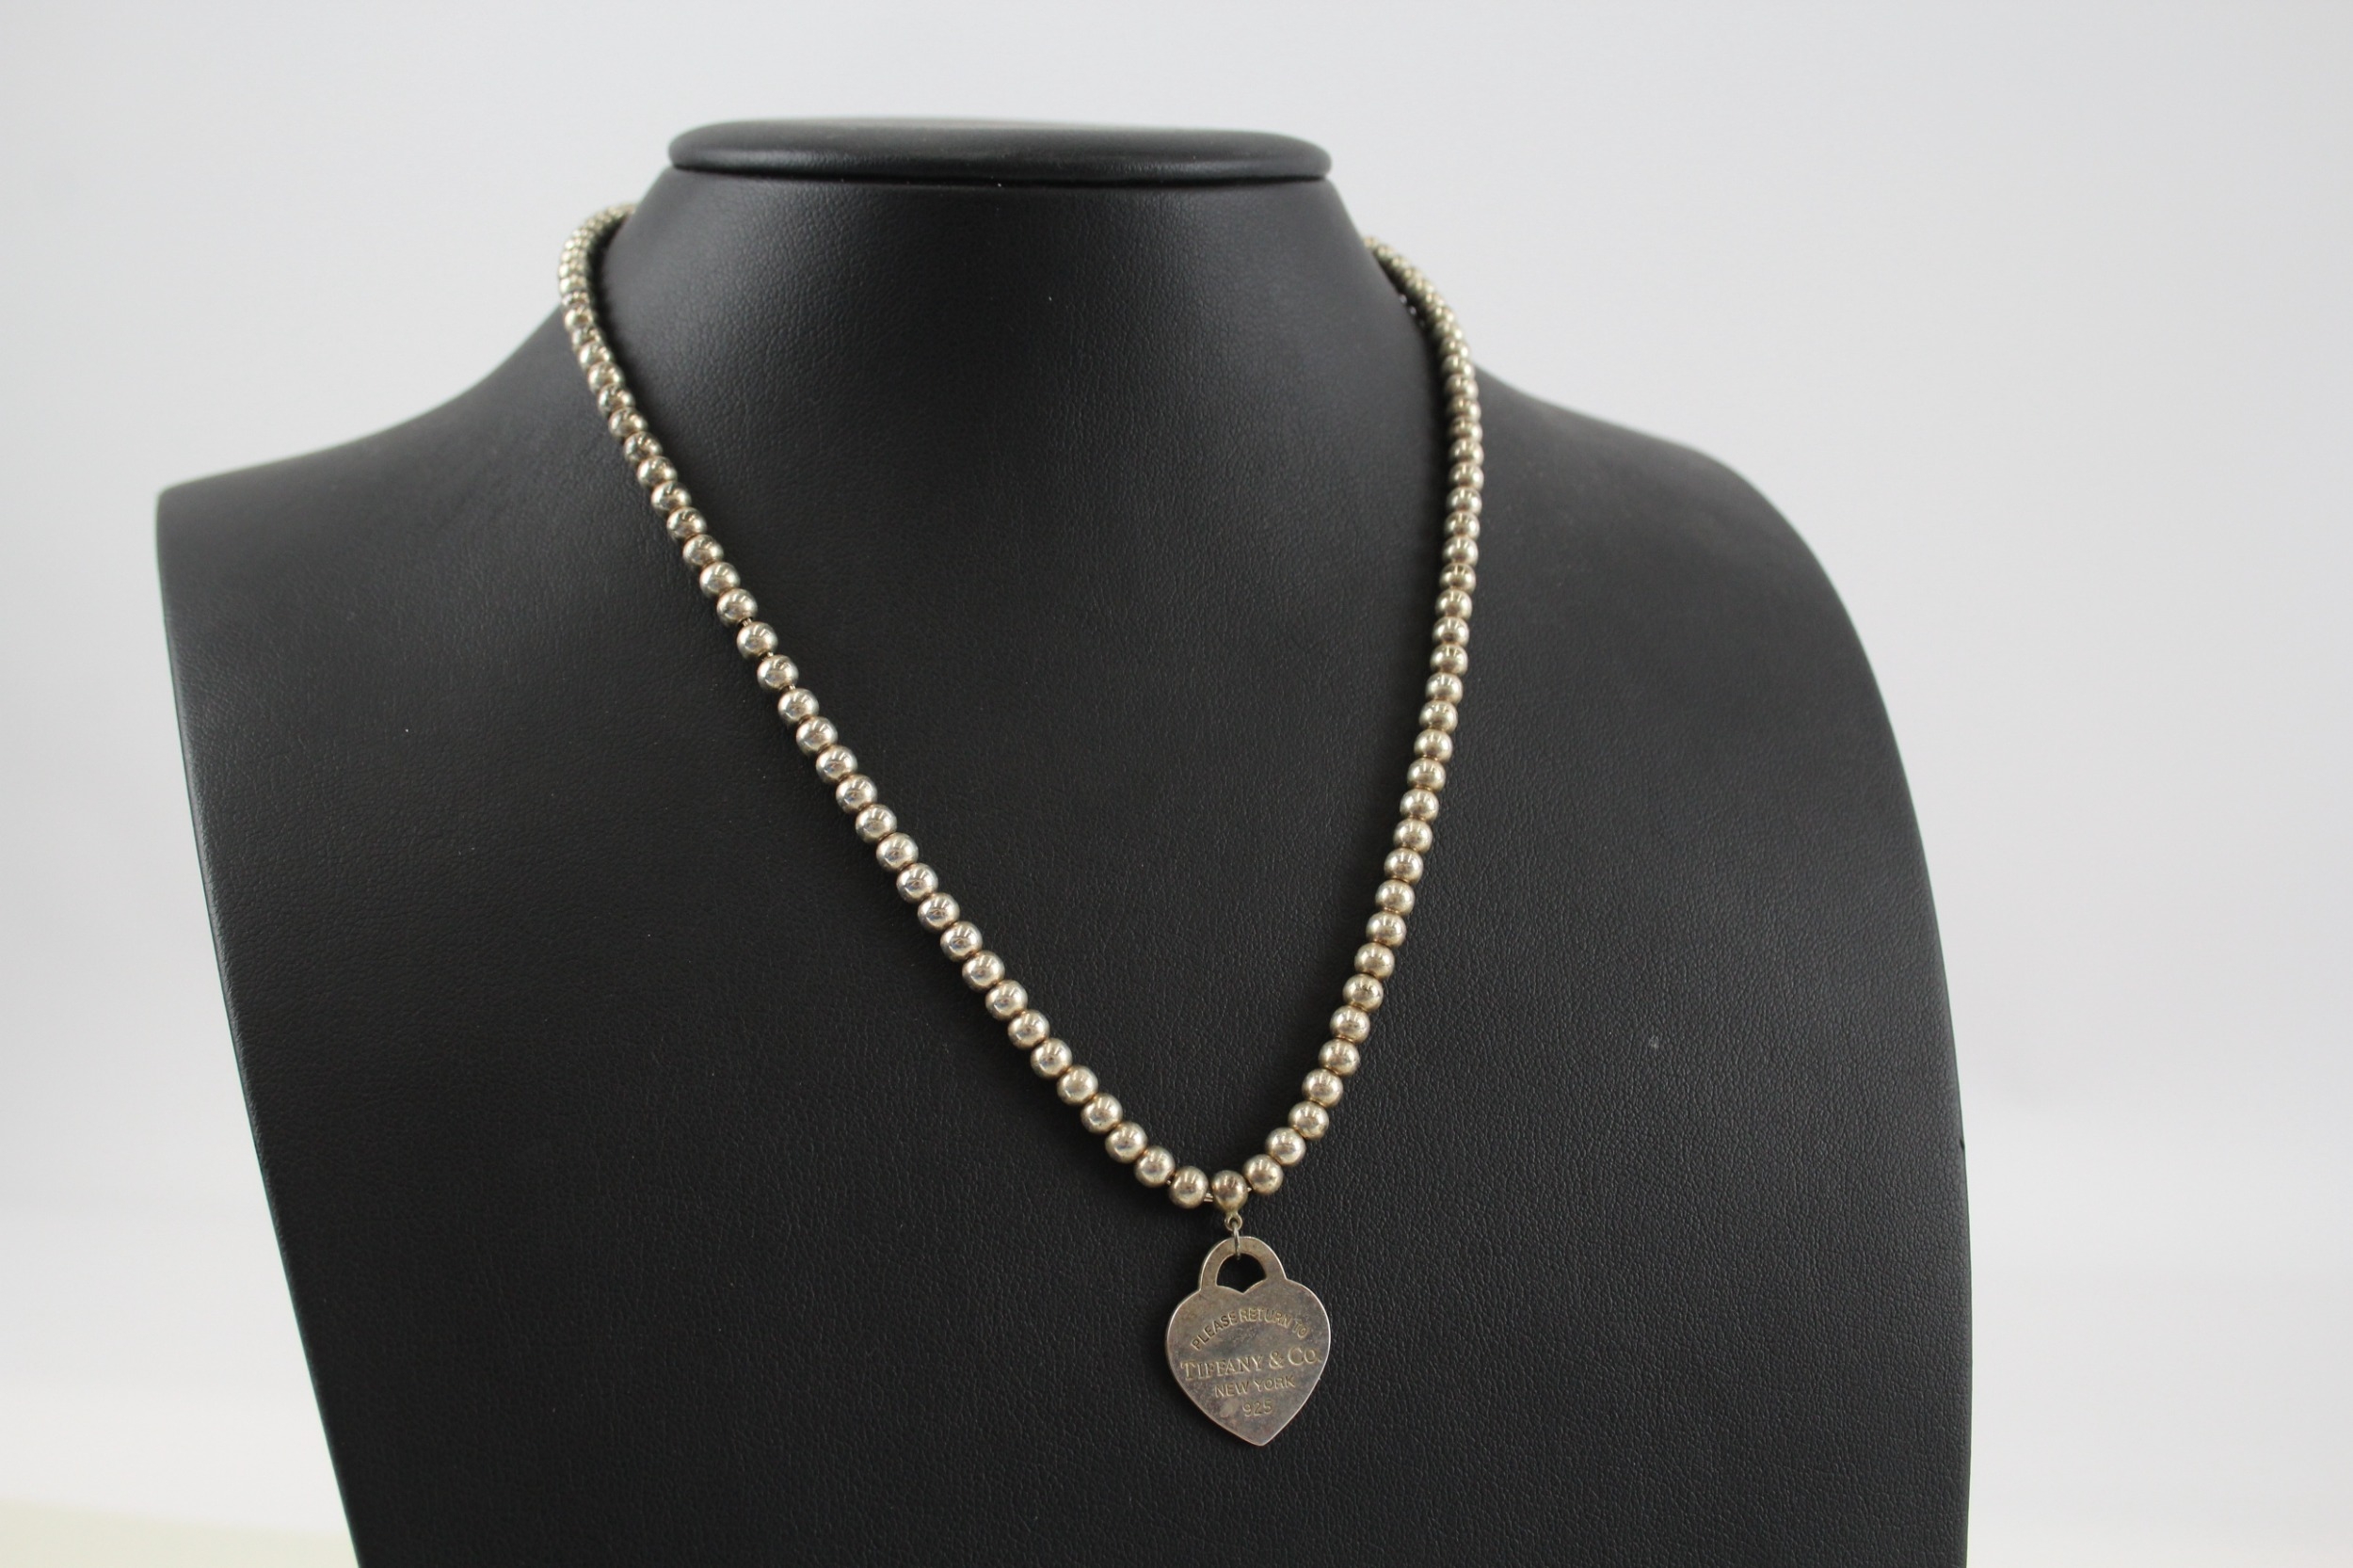 Silver necklace with heart tag by designer Tiffany & Co (12g)